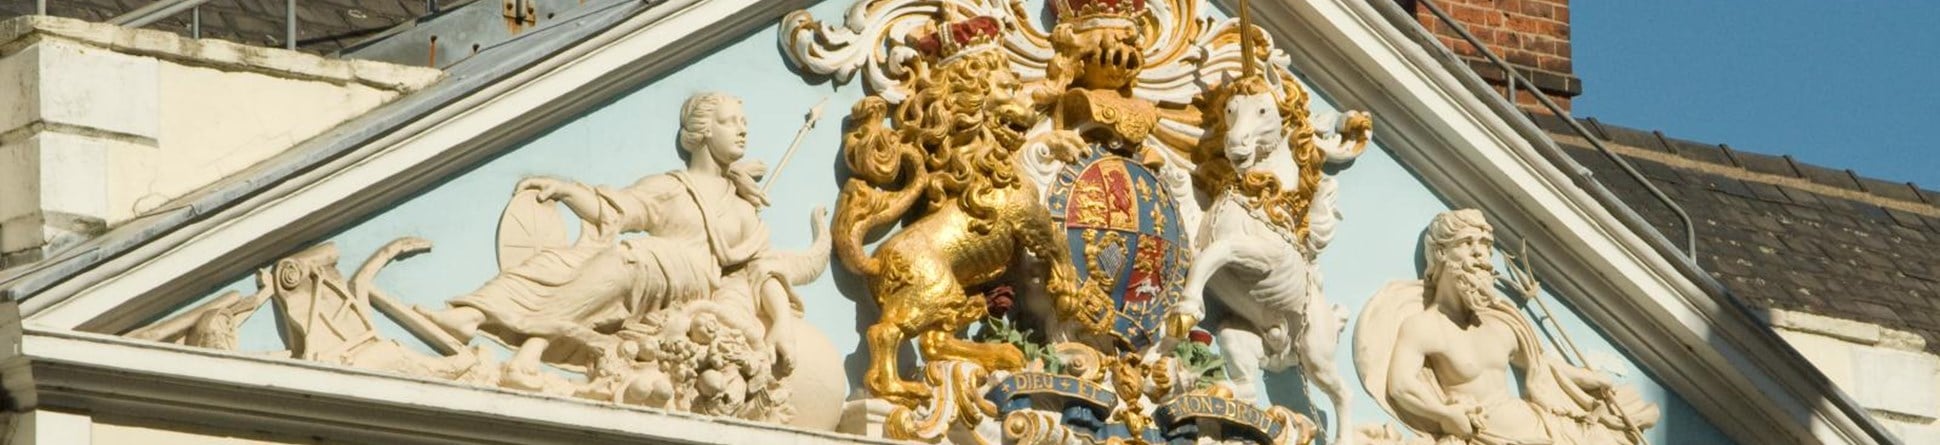 Coat of arms on pediment above Trinity House entrance